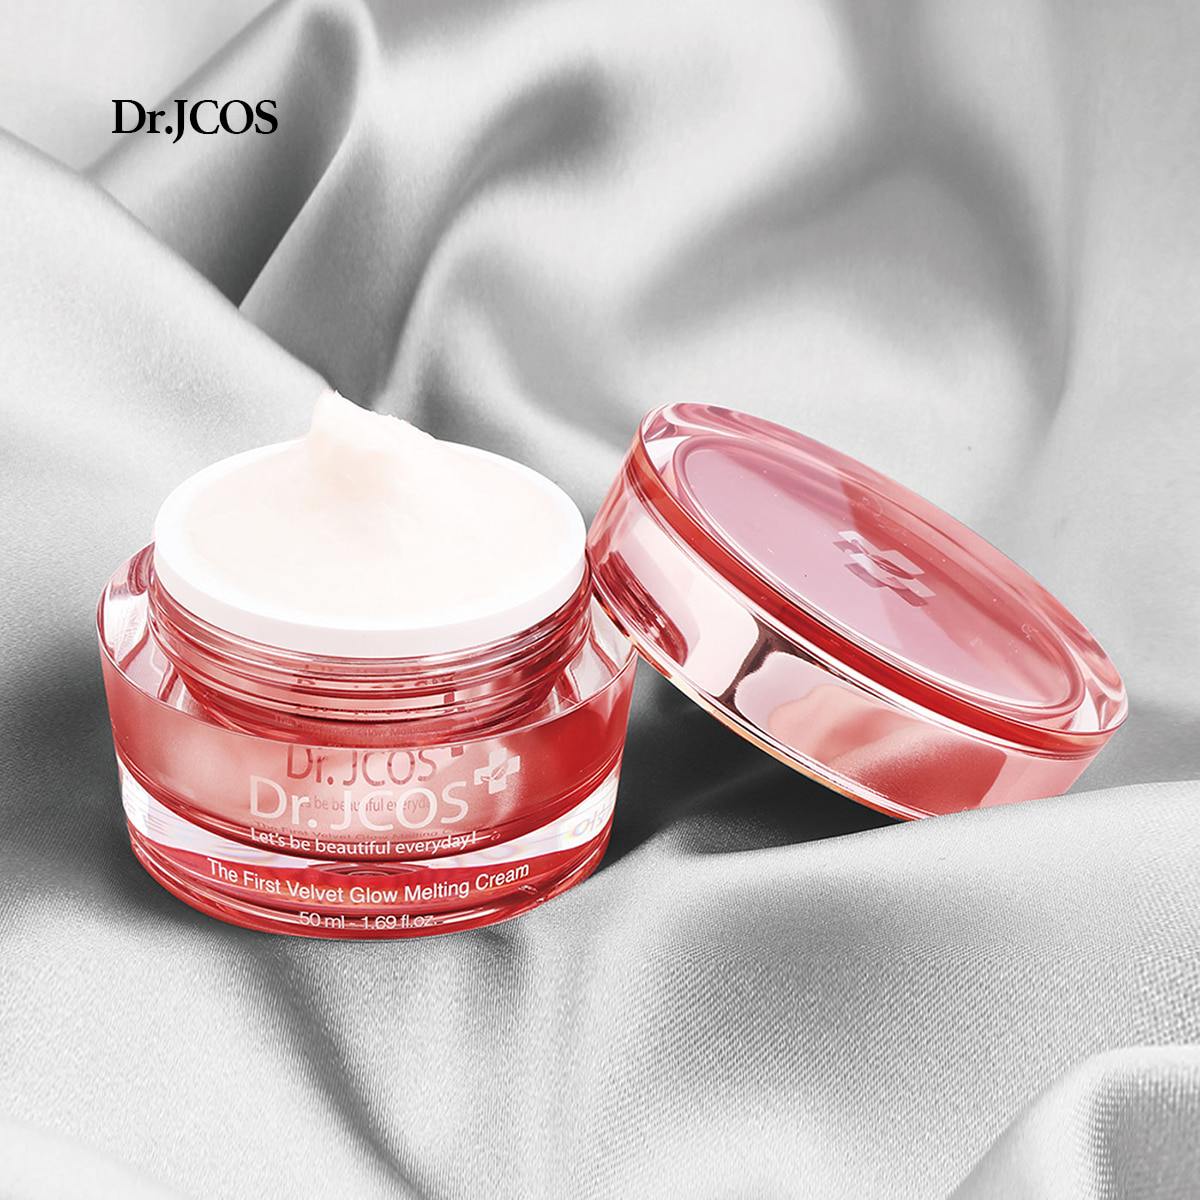 [Stage 3 Real Anti-Aging Cream] Dr.J.Cos The First Velvet Glow Melting Cream.